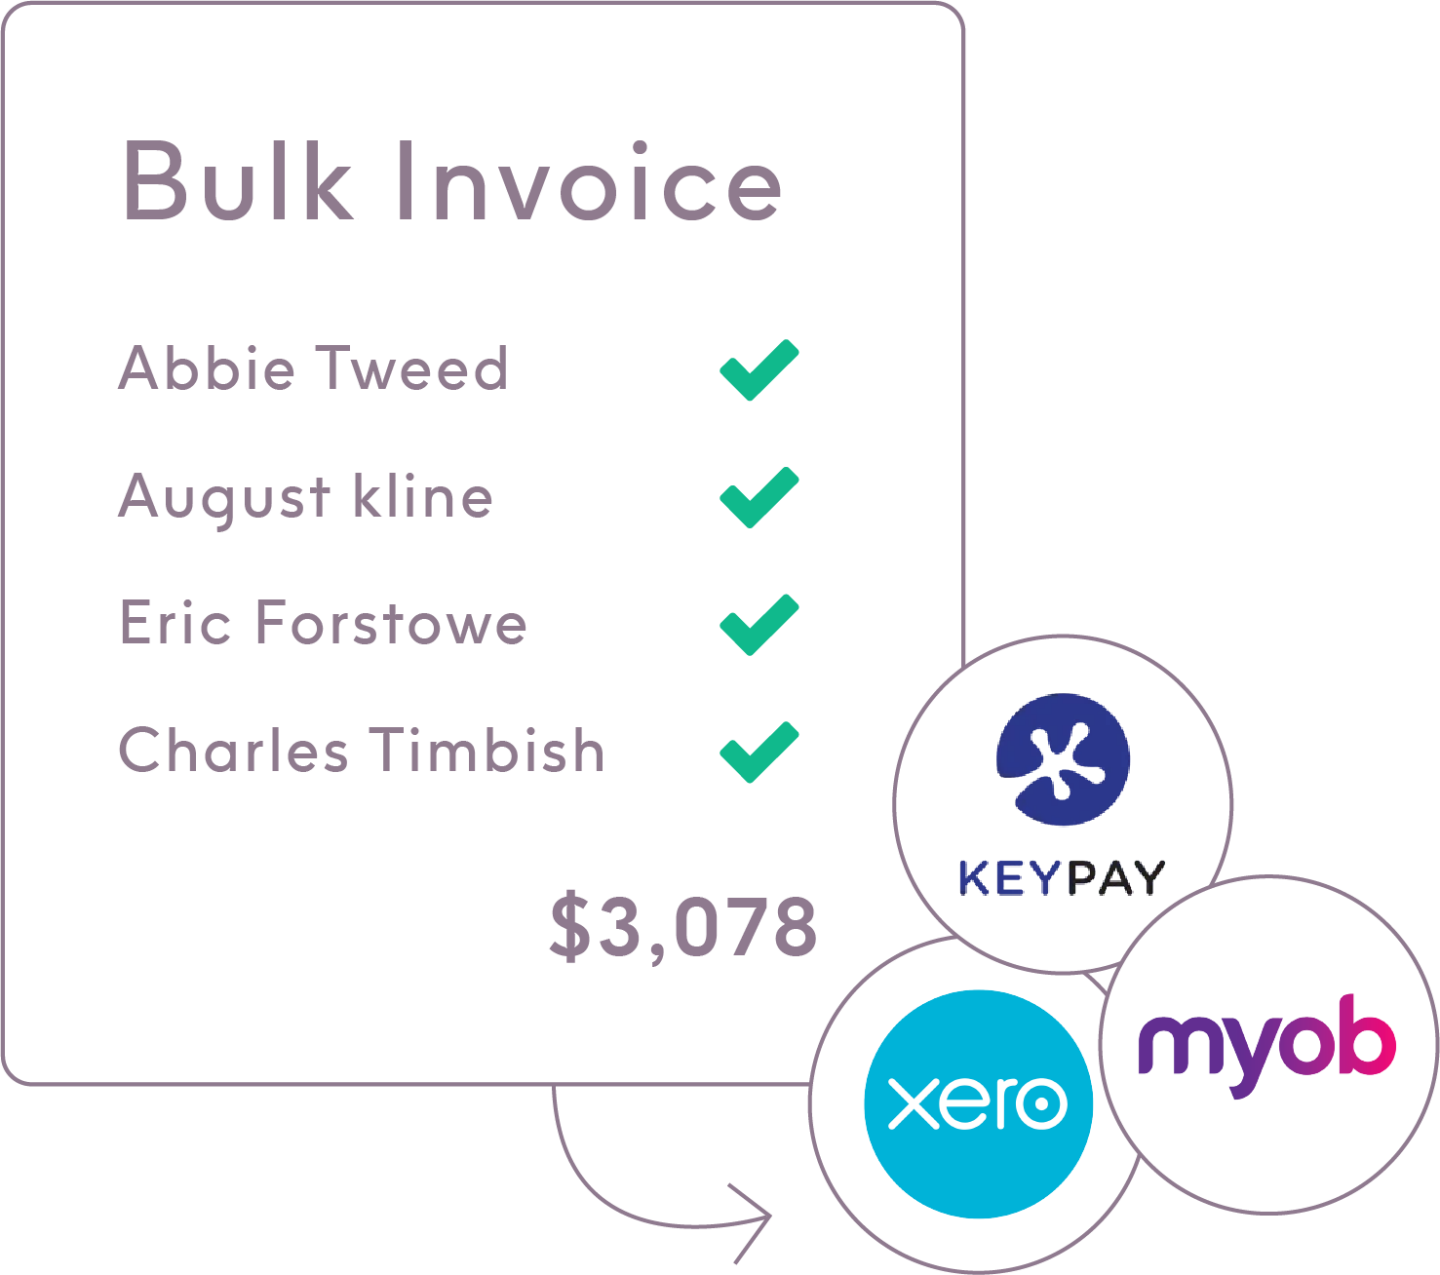 ShiftCare's bulk invoicing function for multiple clients which is integrated with accounting systems like MYOB, Xero, and KeyPay